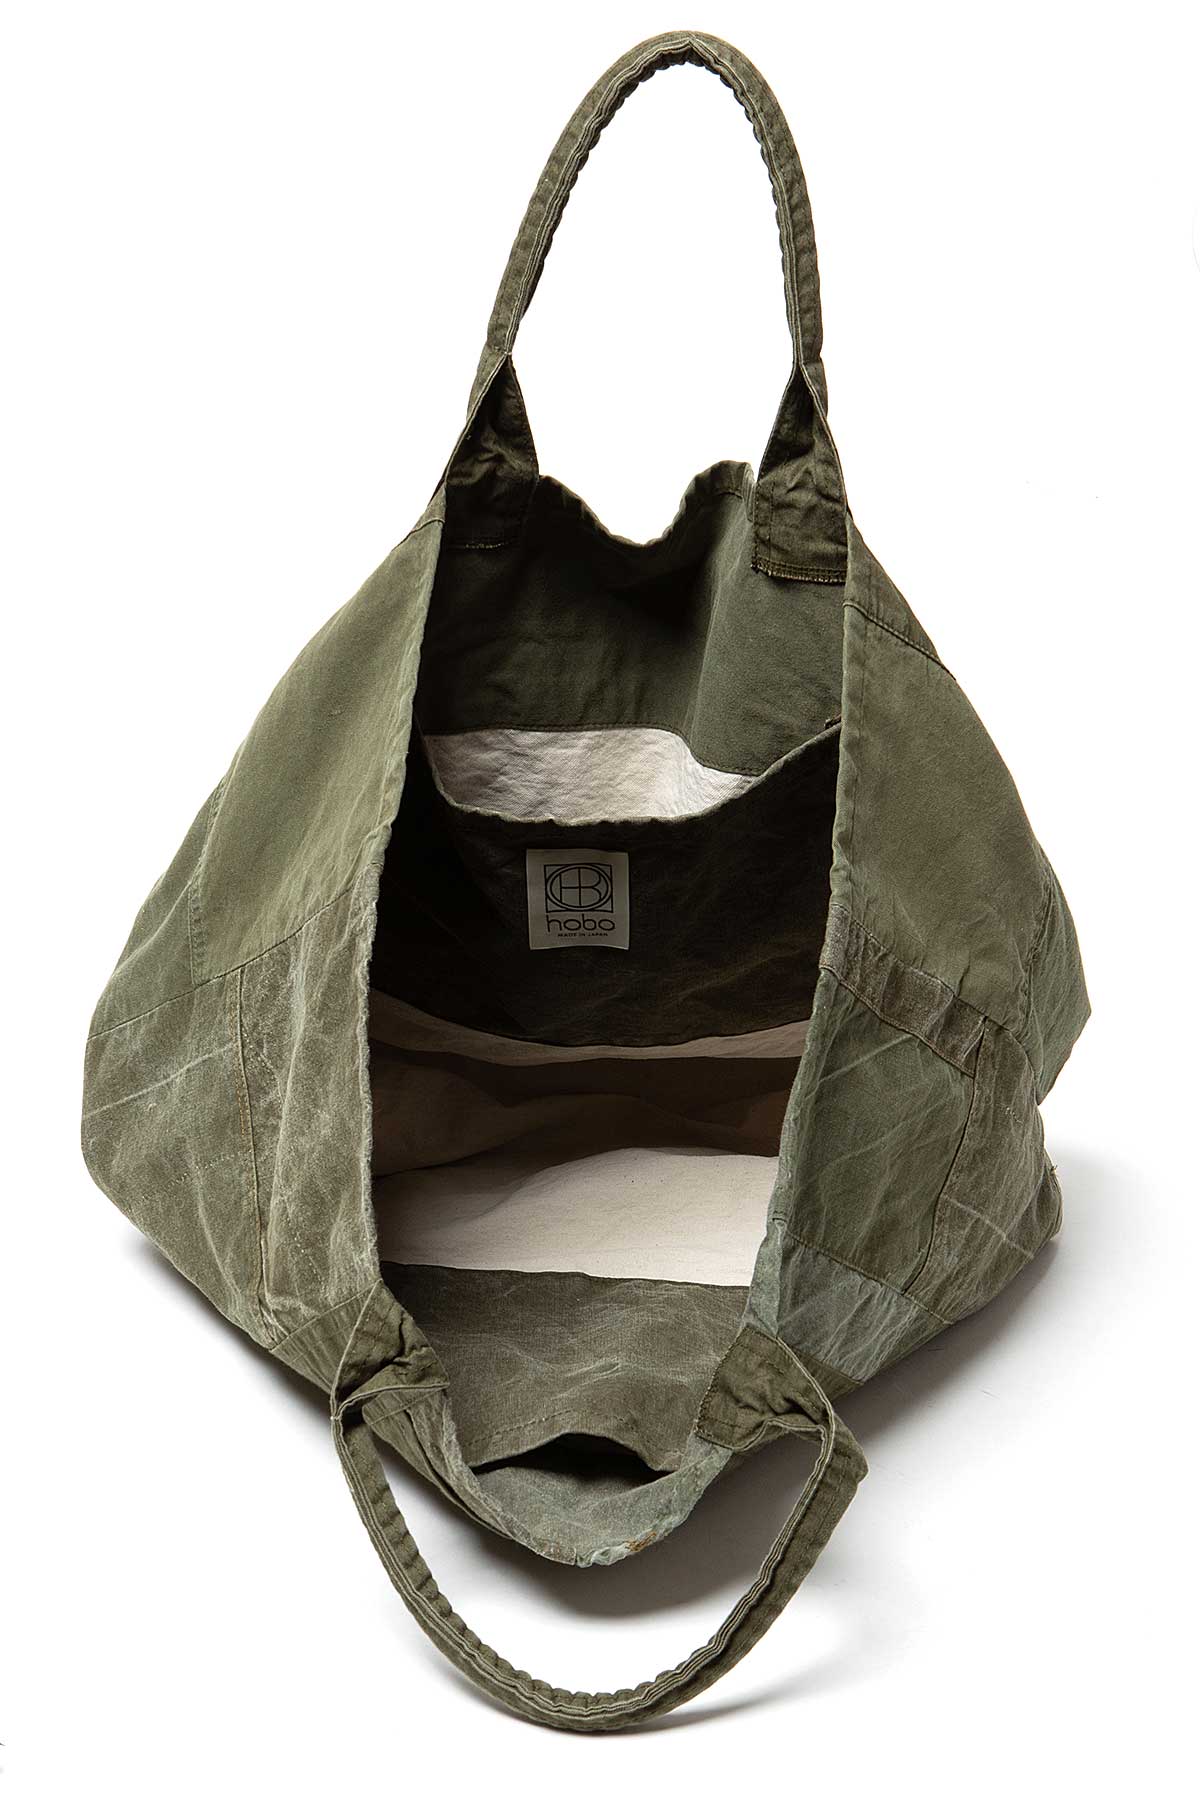 CARRY-ALL TOTE L UPCYCLED US ARMY CLOTH | hobo